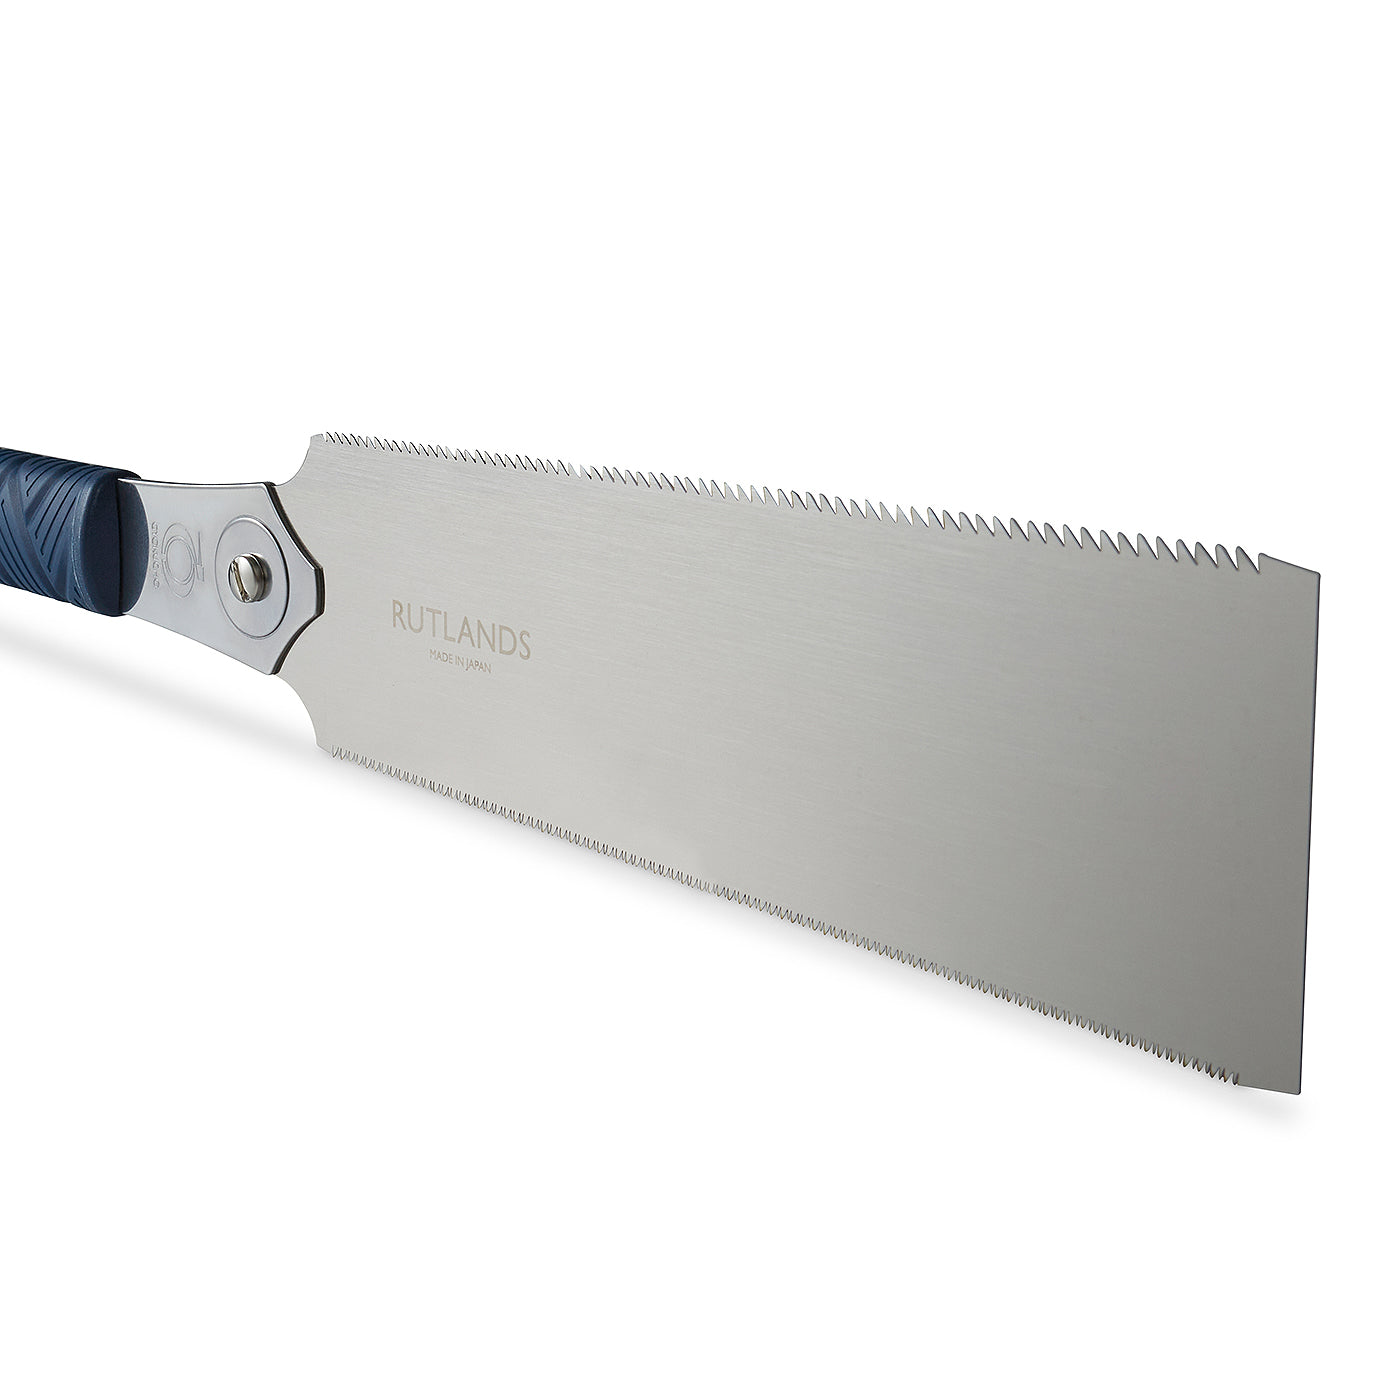 Japanese Ryoba Next Limited Day Saws Delivery Rutlands – 